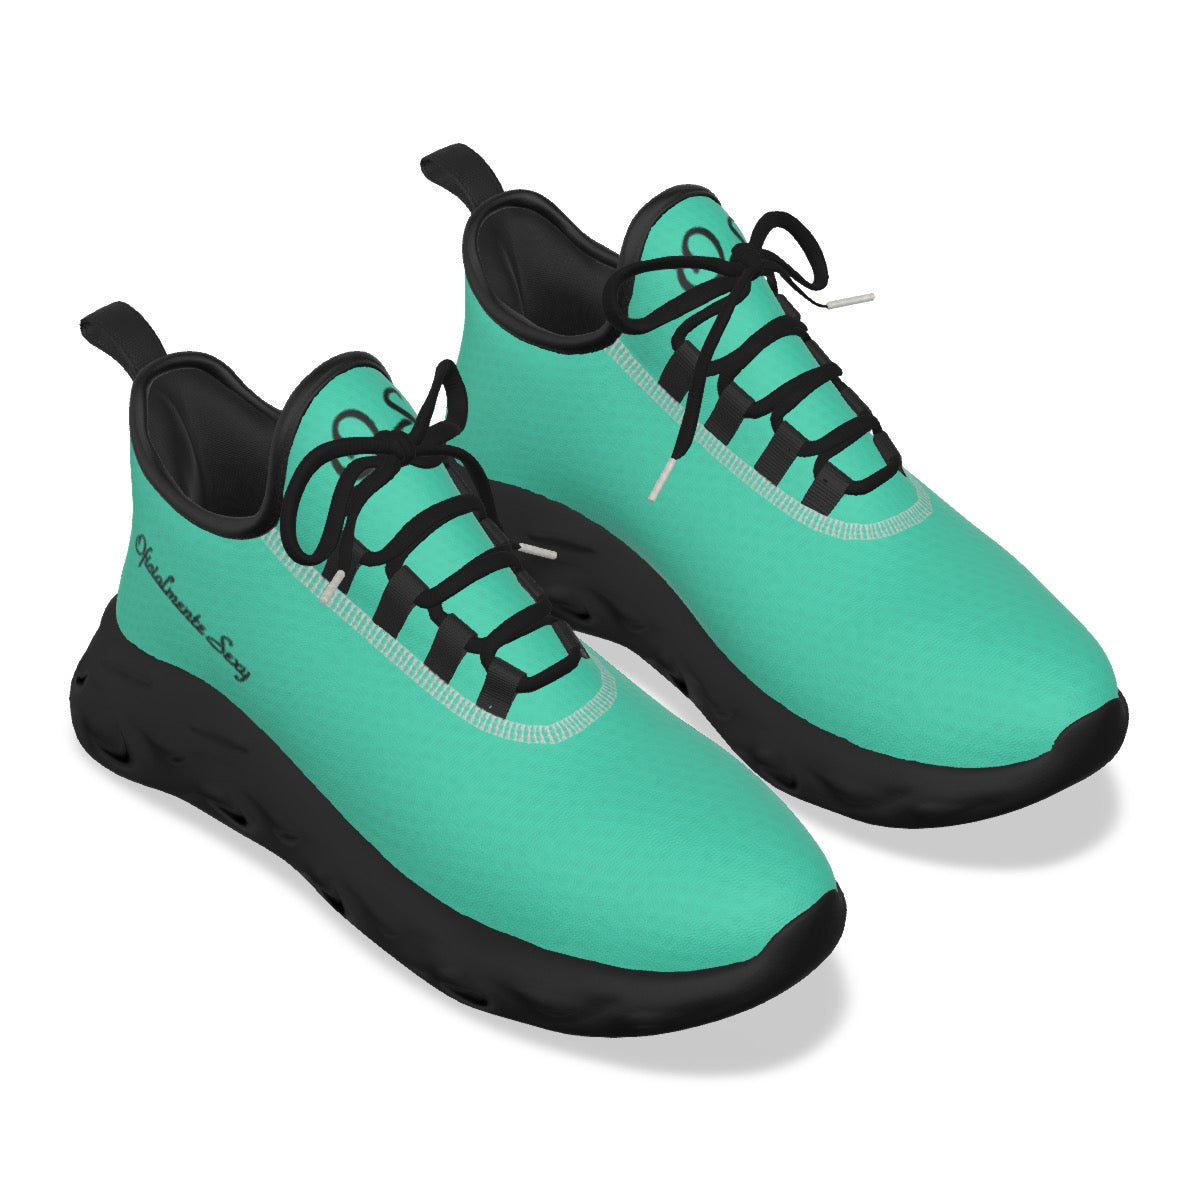 Oficialmente Sexy Turquoise Green Light Sports Shoes With Black Logos